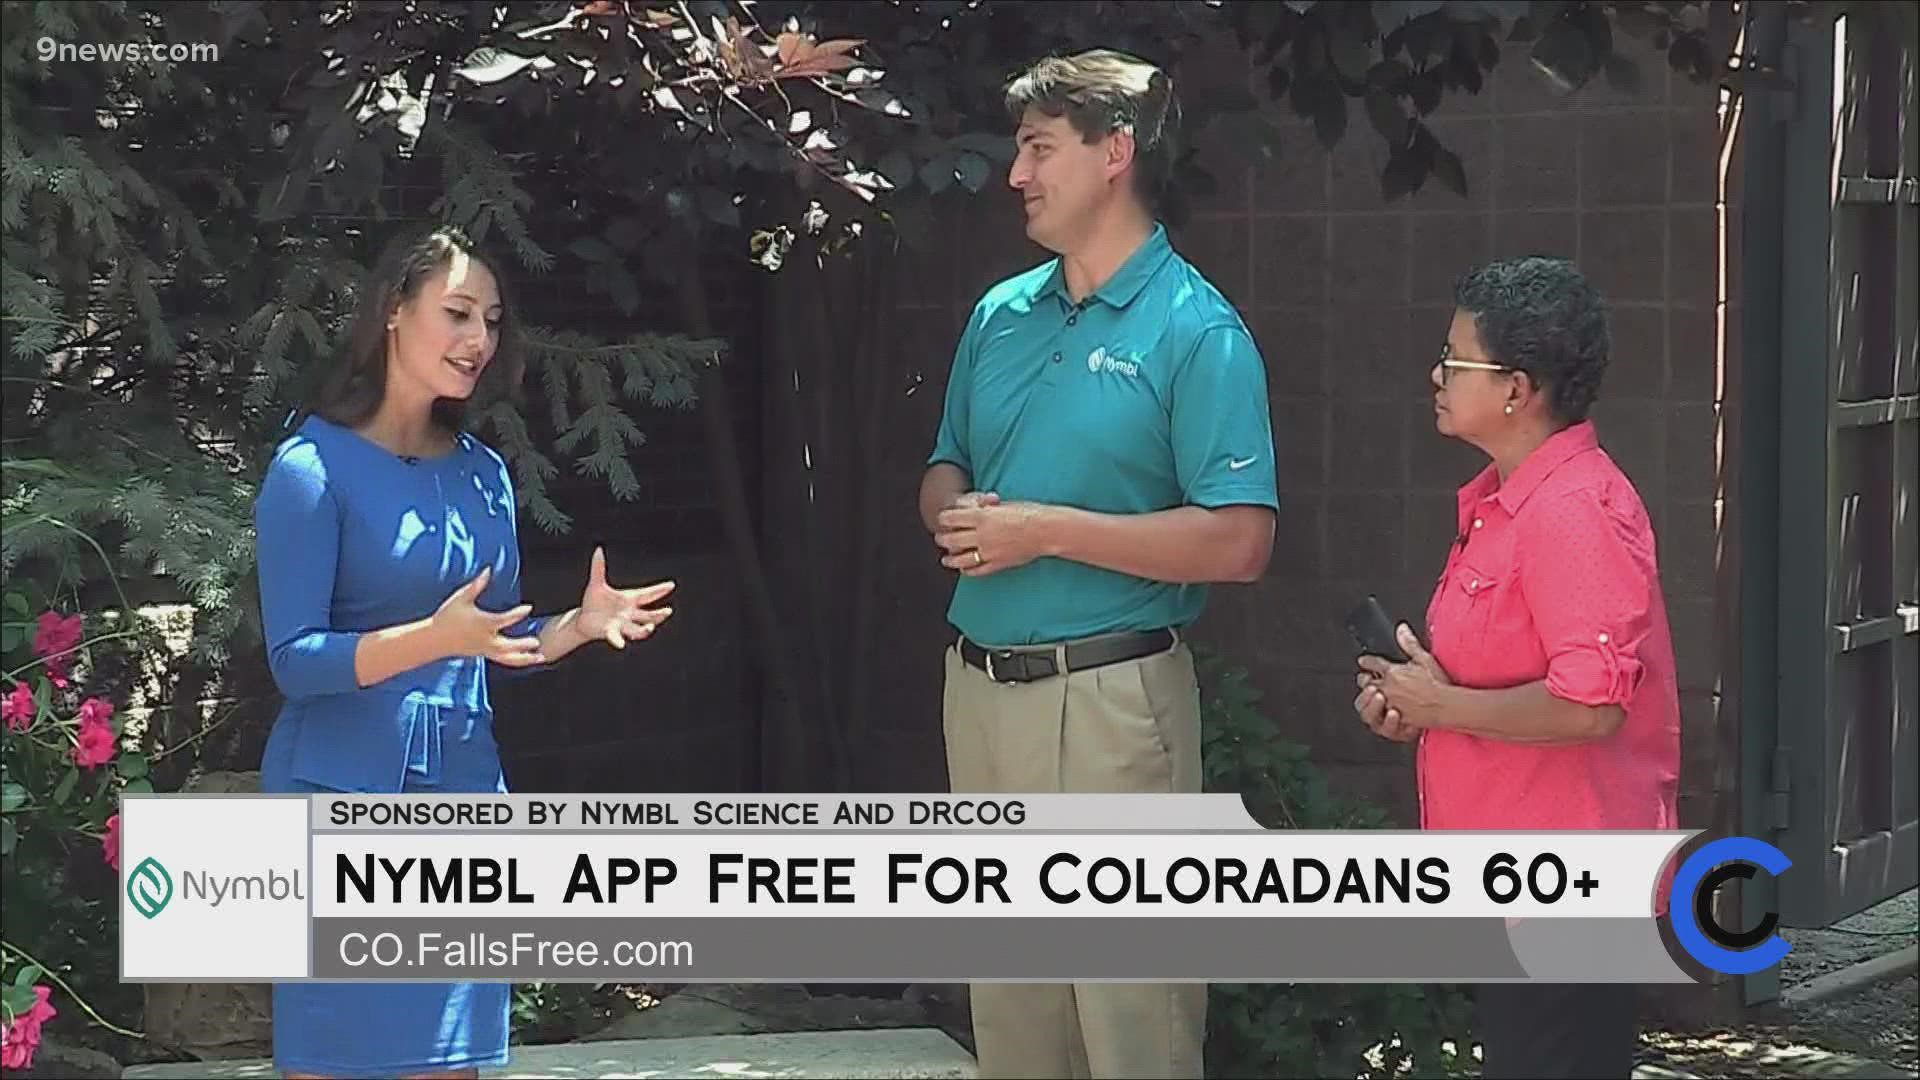 Nymbl is free for all Coloradans 60 and up. Visit CO.FallsFree.com to learn more about improving your balance. **PAID CONTENT**